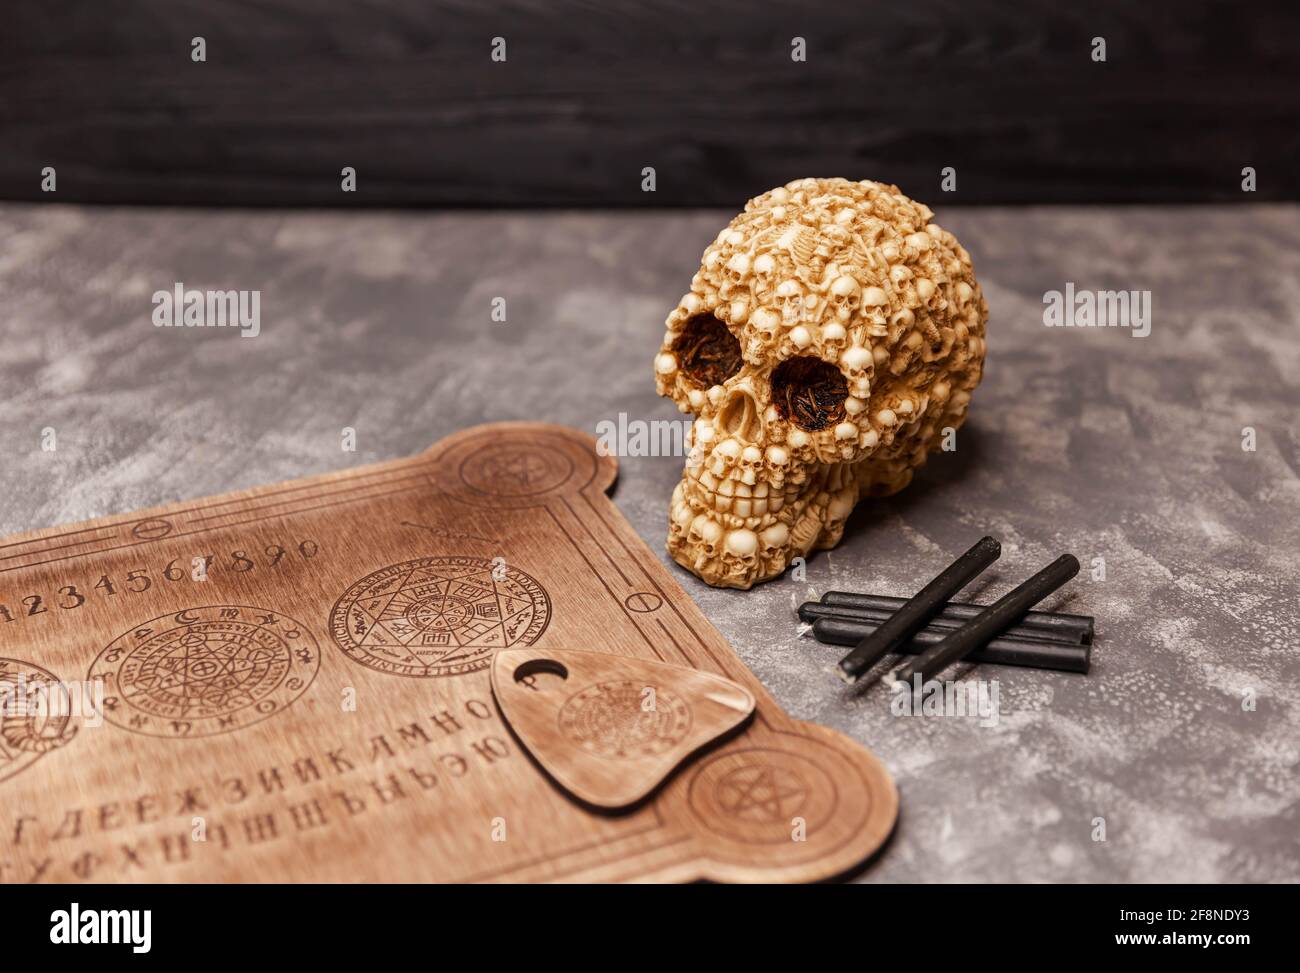 Talking board used on seances for communicating with the dead. Stock Photo